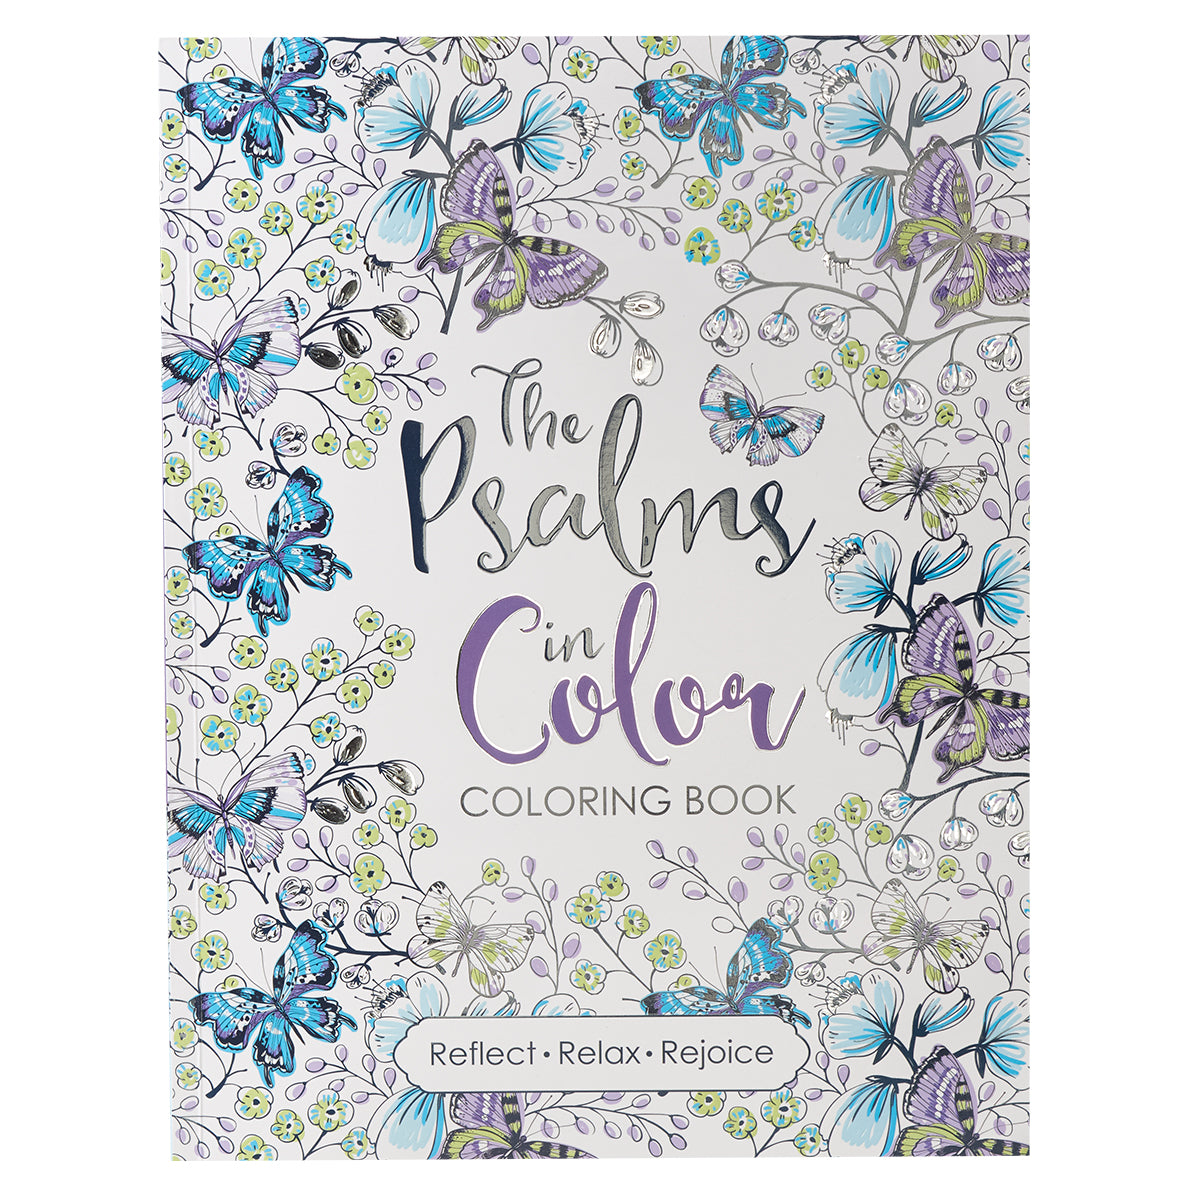 The Psalms in Color Colouring Book - The Christian Gift Company